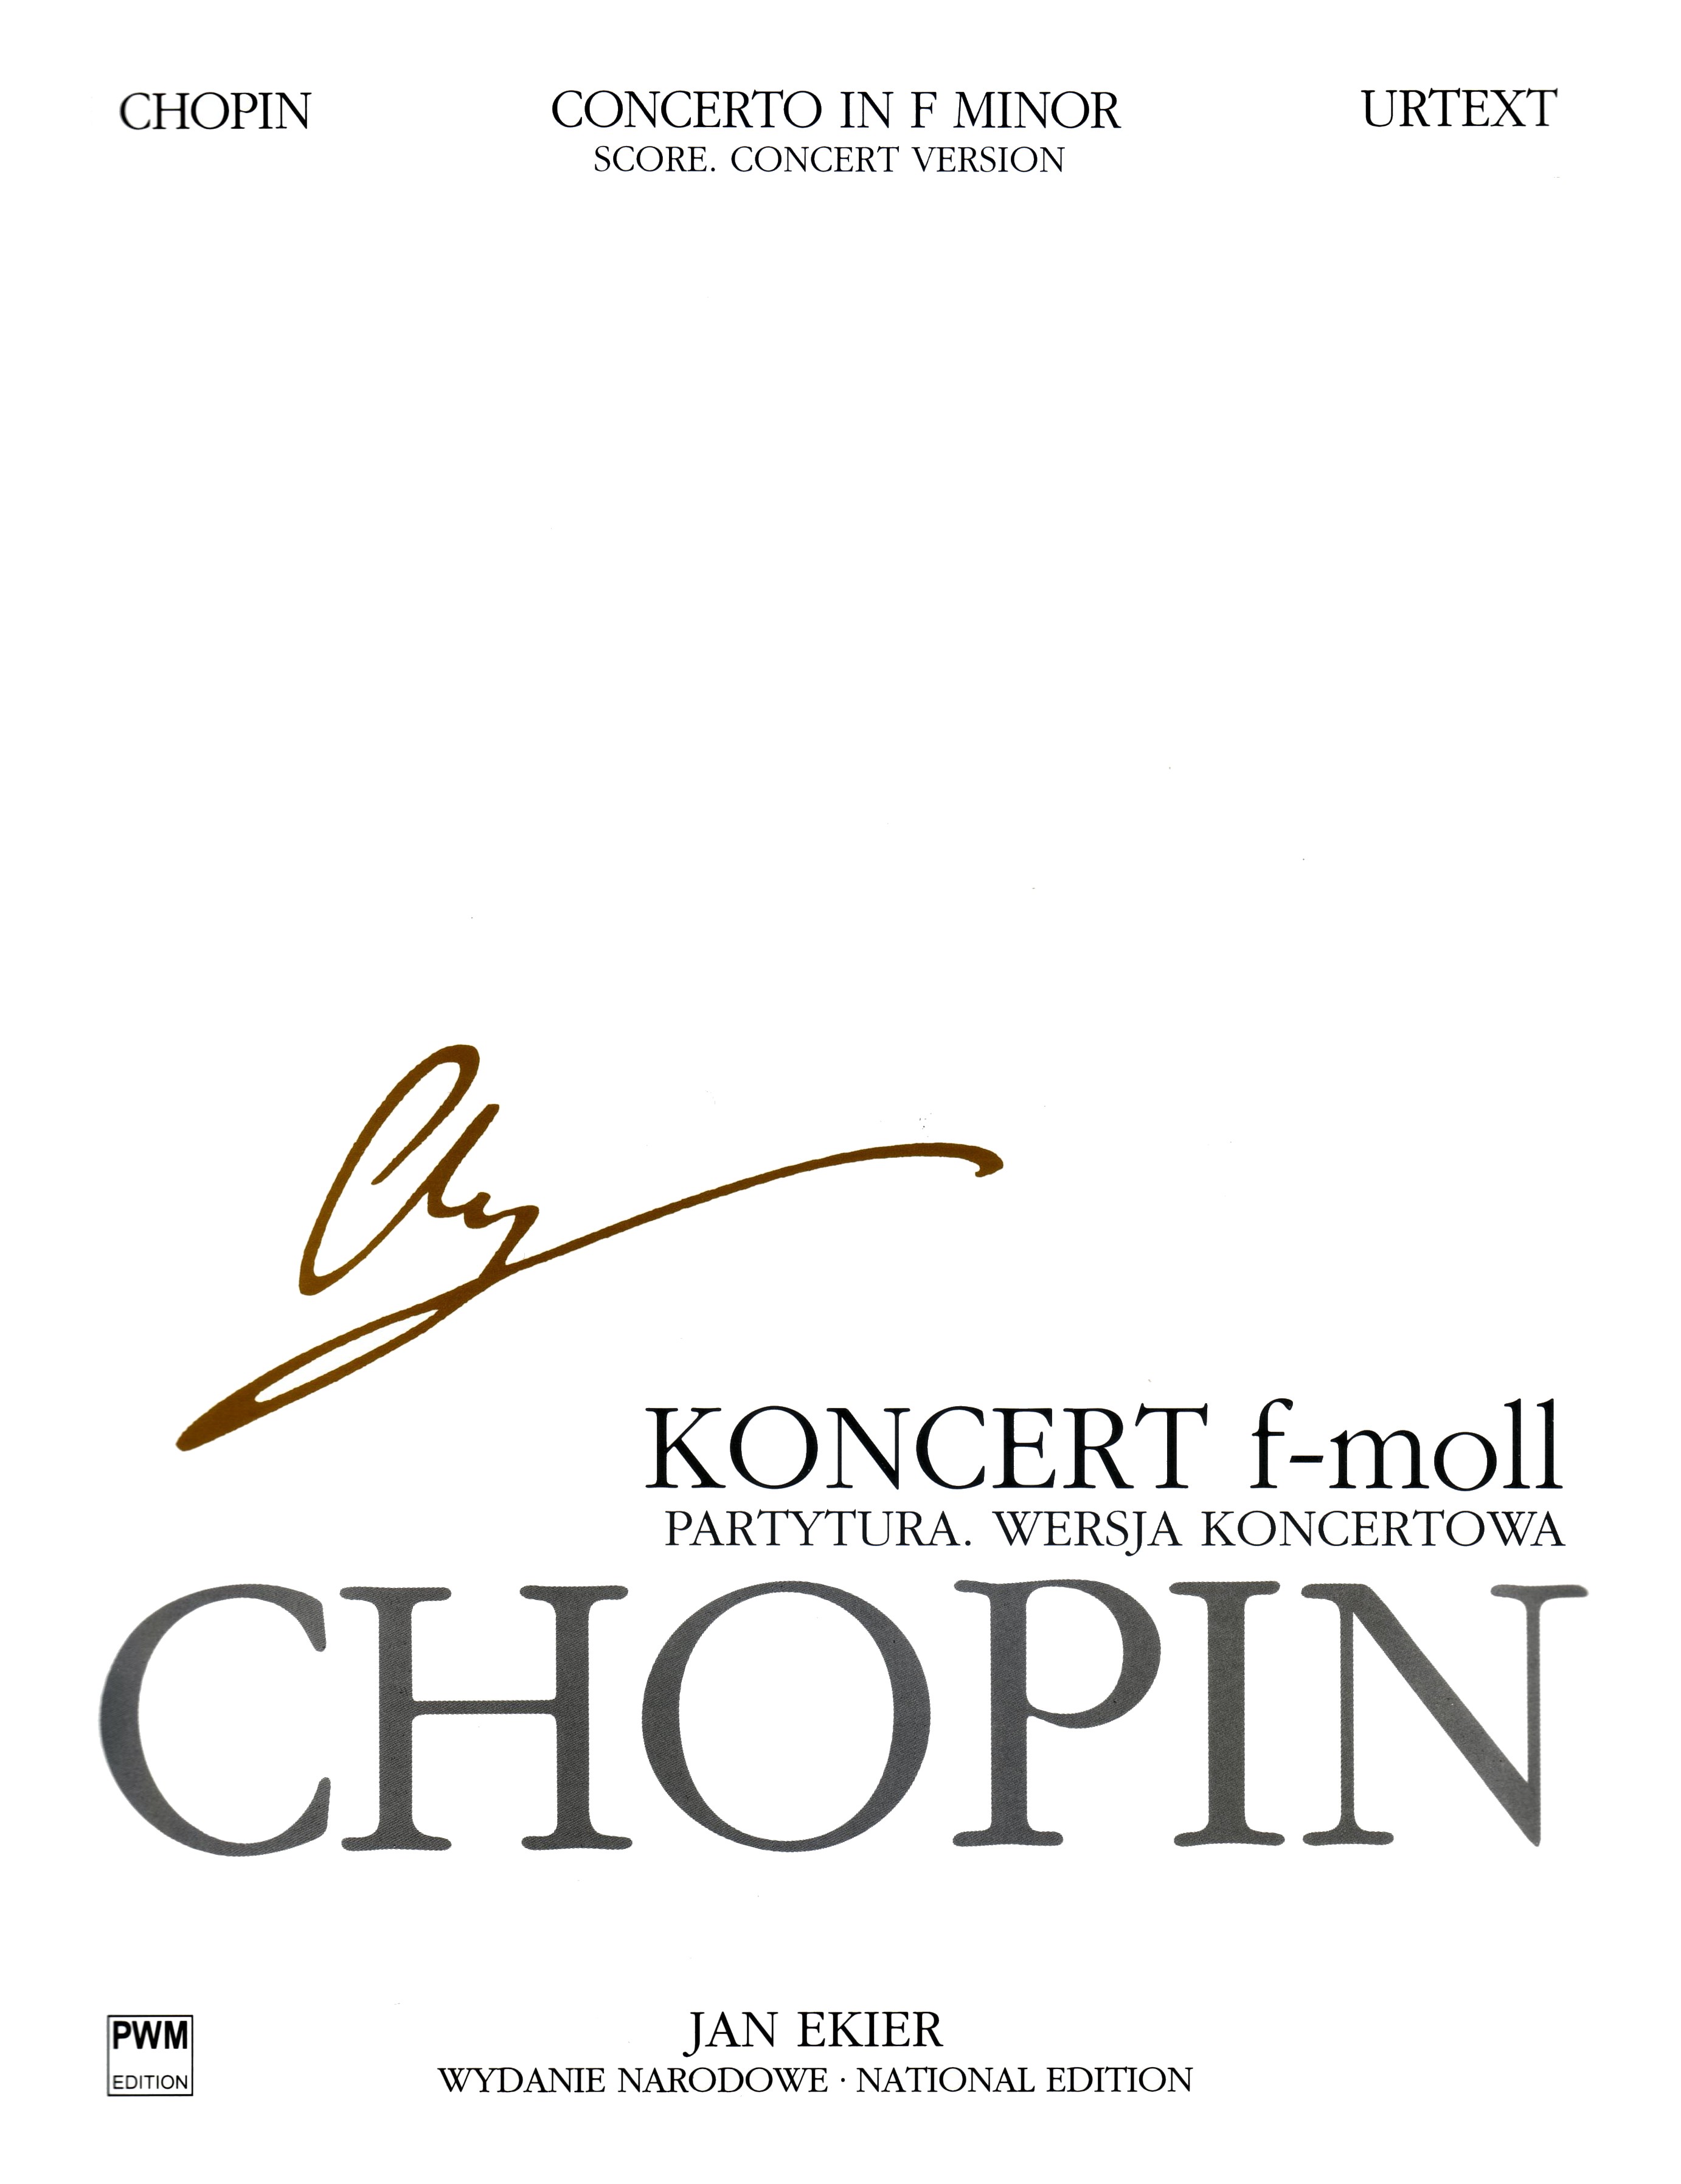 Frdric Chopin: National Edition: Concerto In F Minor Op 21: Piano: